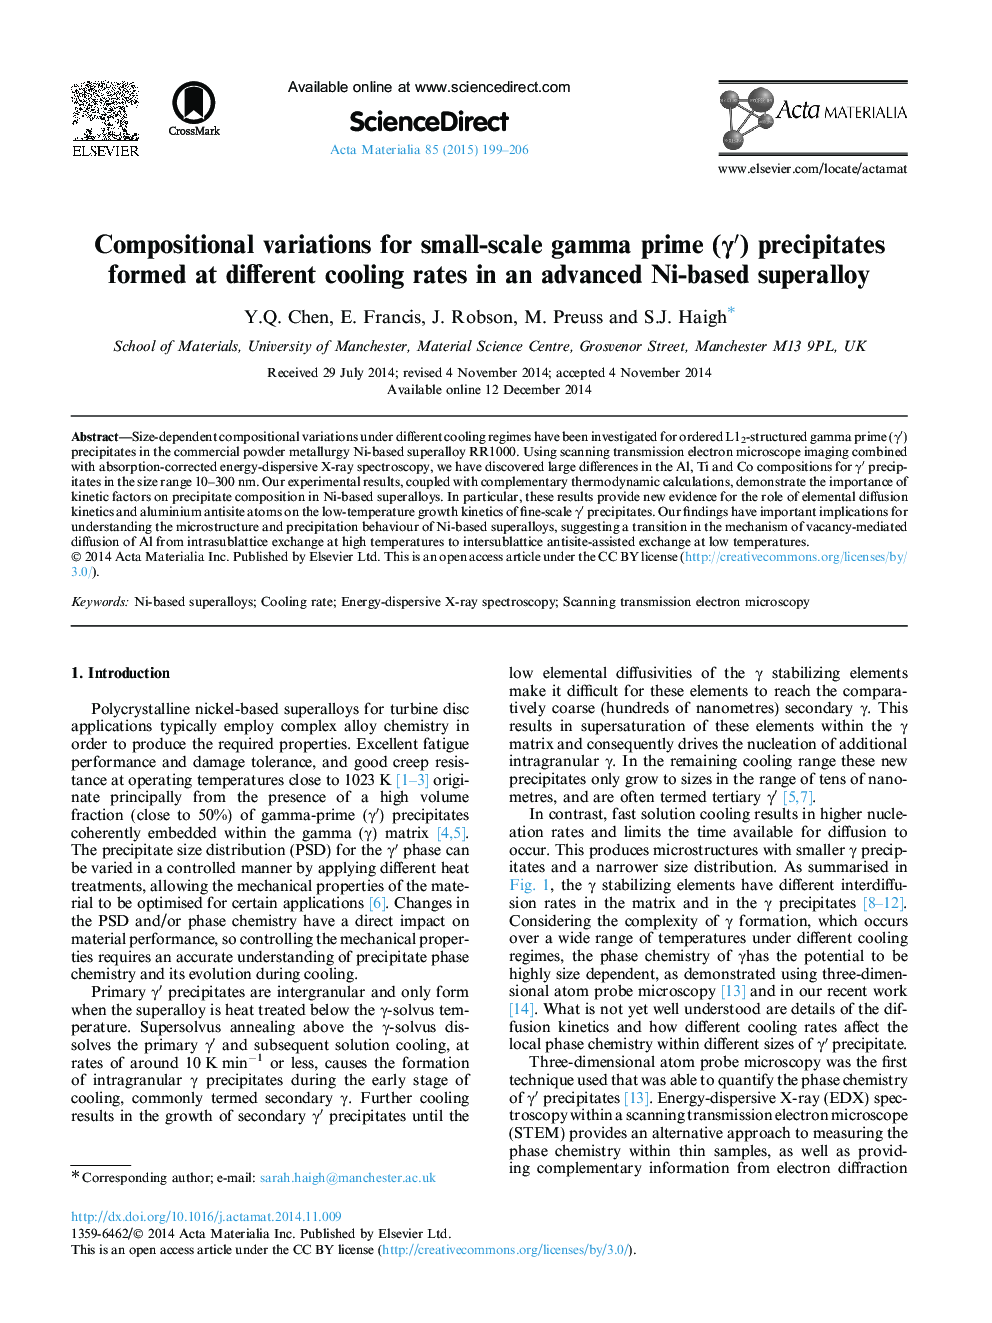 Compositional variations for small-scale gamma prime (Î³â²) precipitates formed at different cooling rates in an advanced Ni-based superalloy